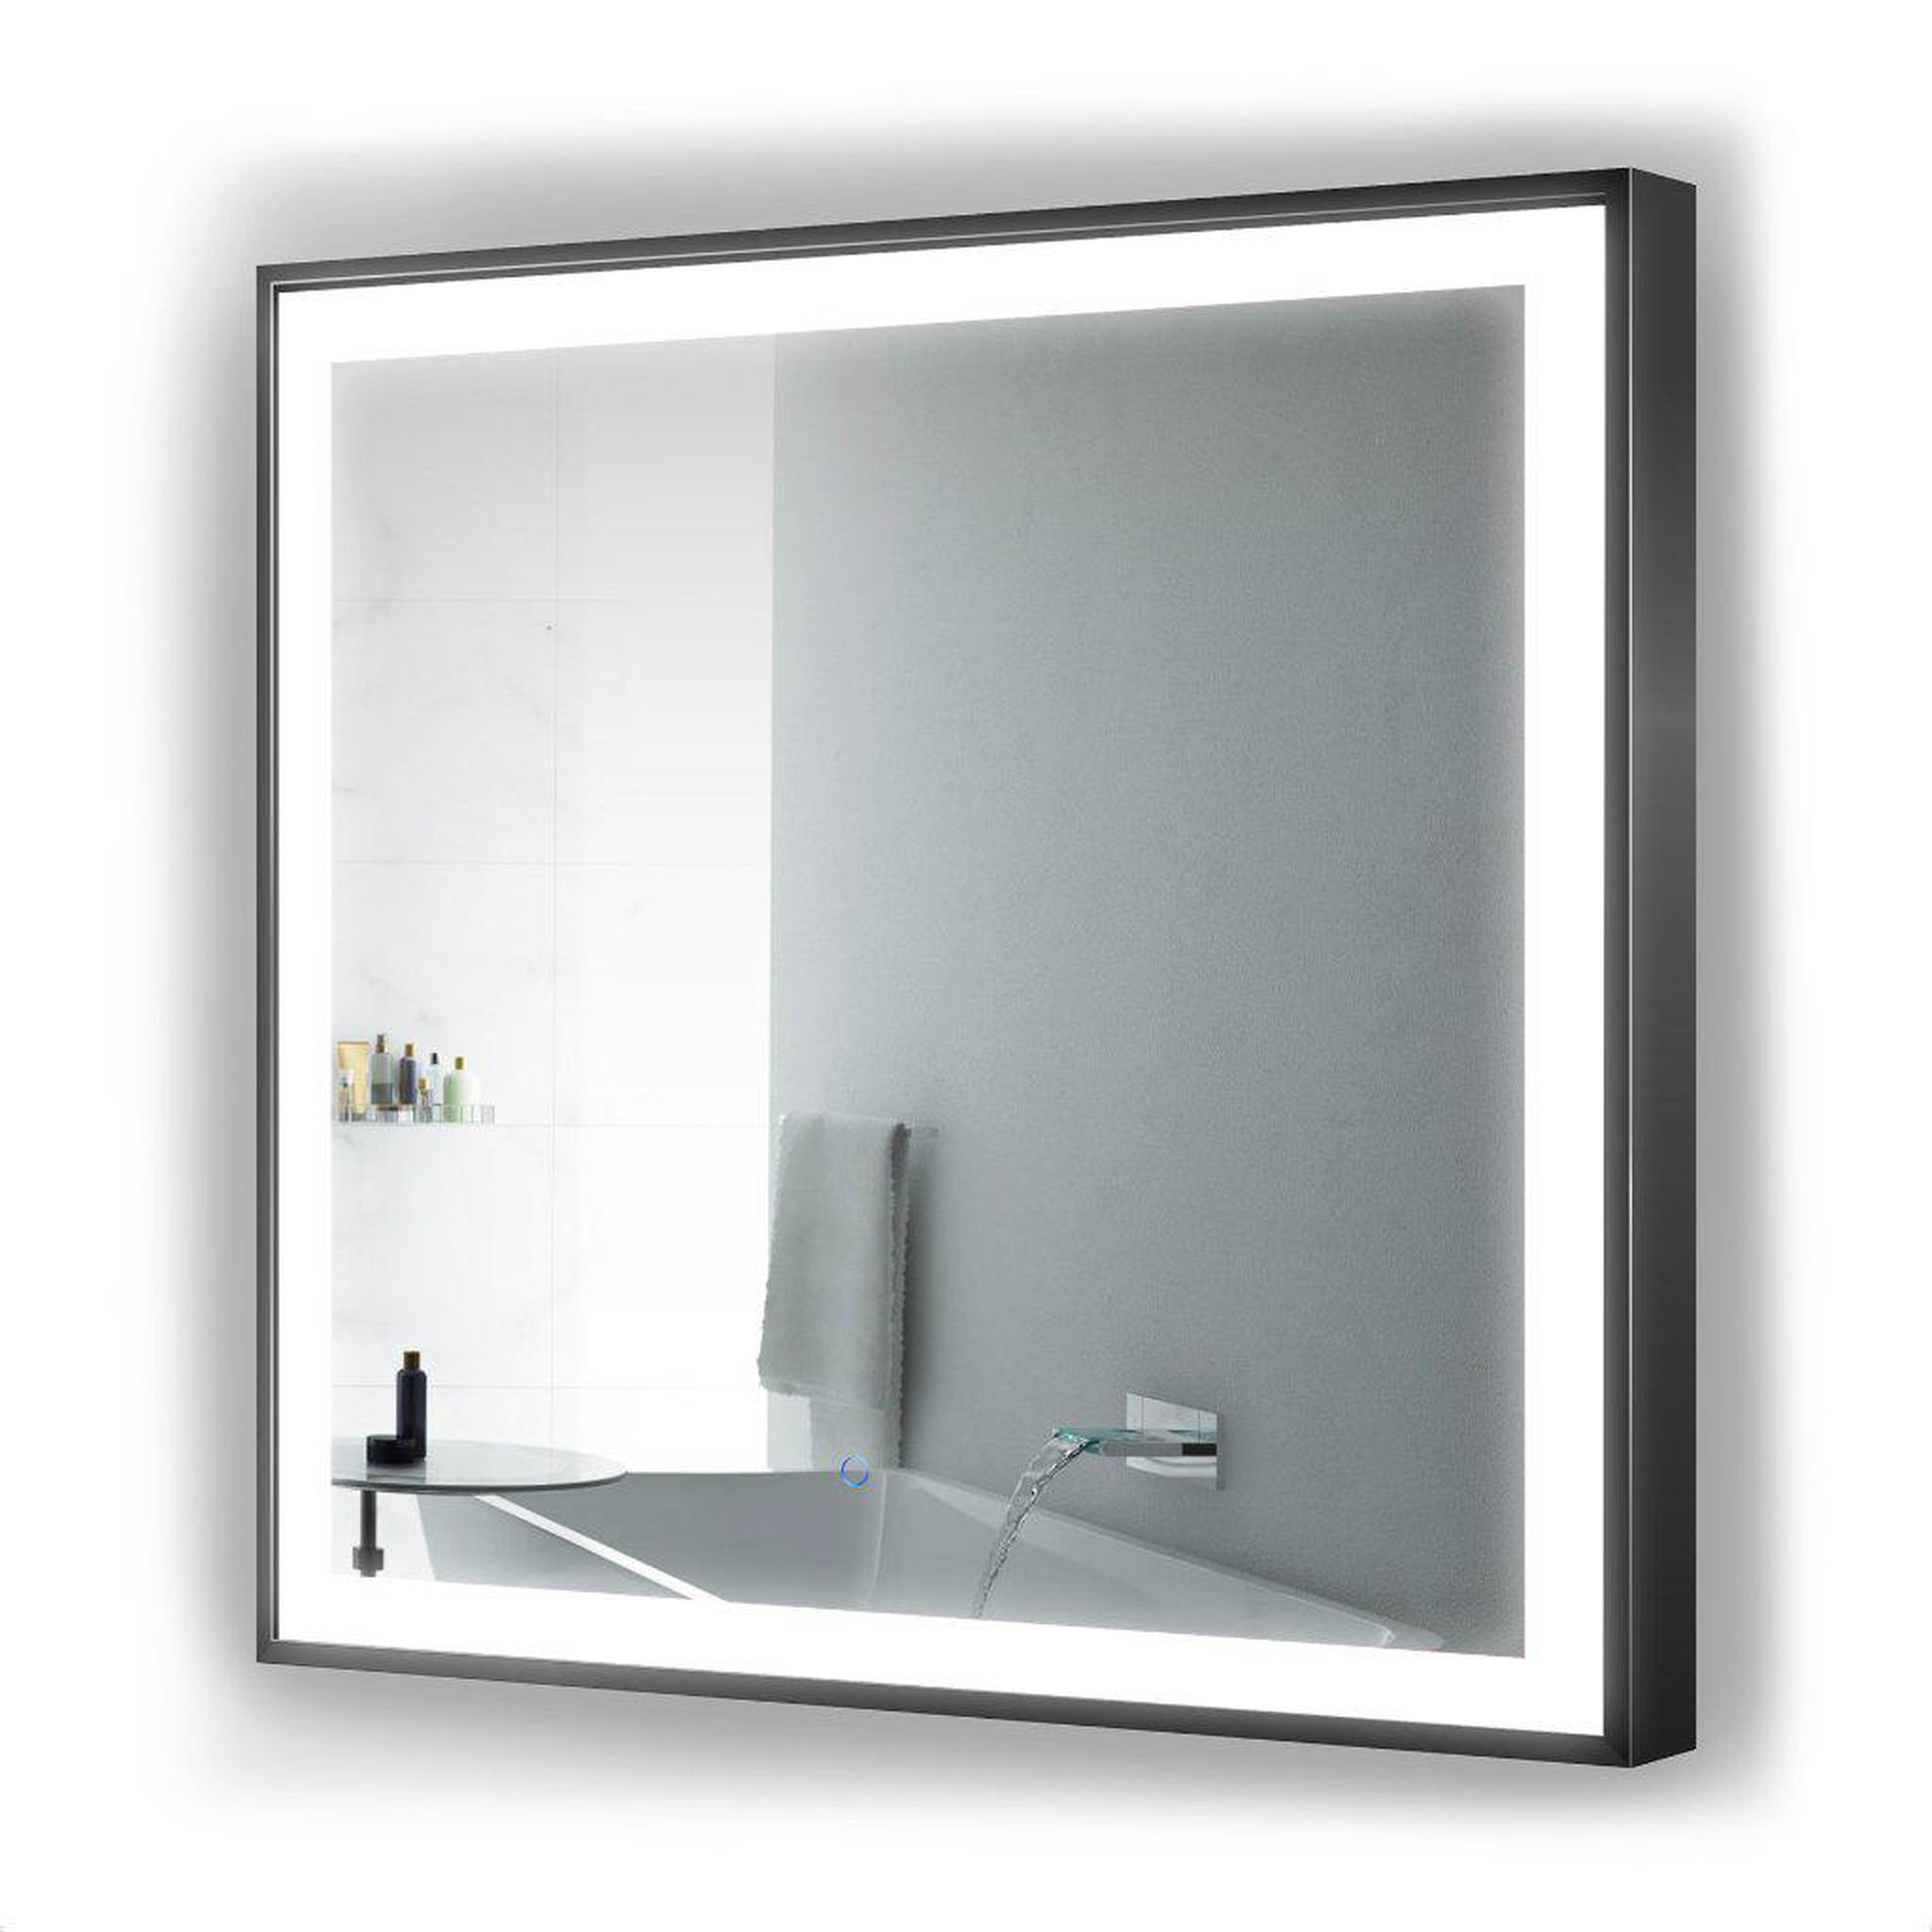 Krugg Reflections, Krugg Reflections Soho 36" x 36" 5000K Square Matte Black Wall-Mounted Framed LED Bathroom Vanity Mirror With Built-in Defogger and Dimmer